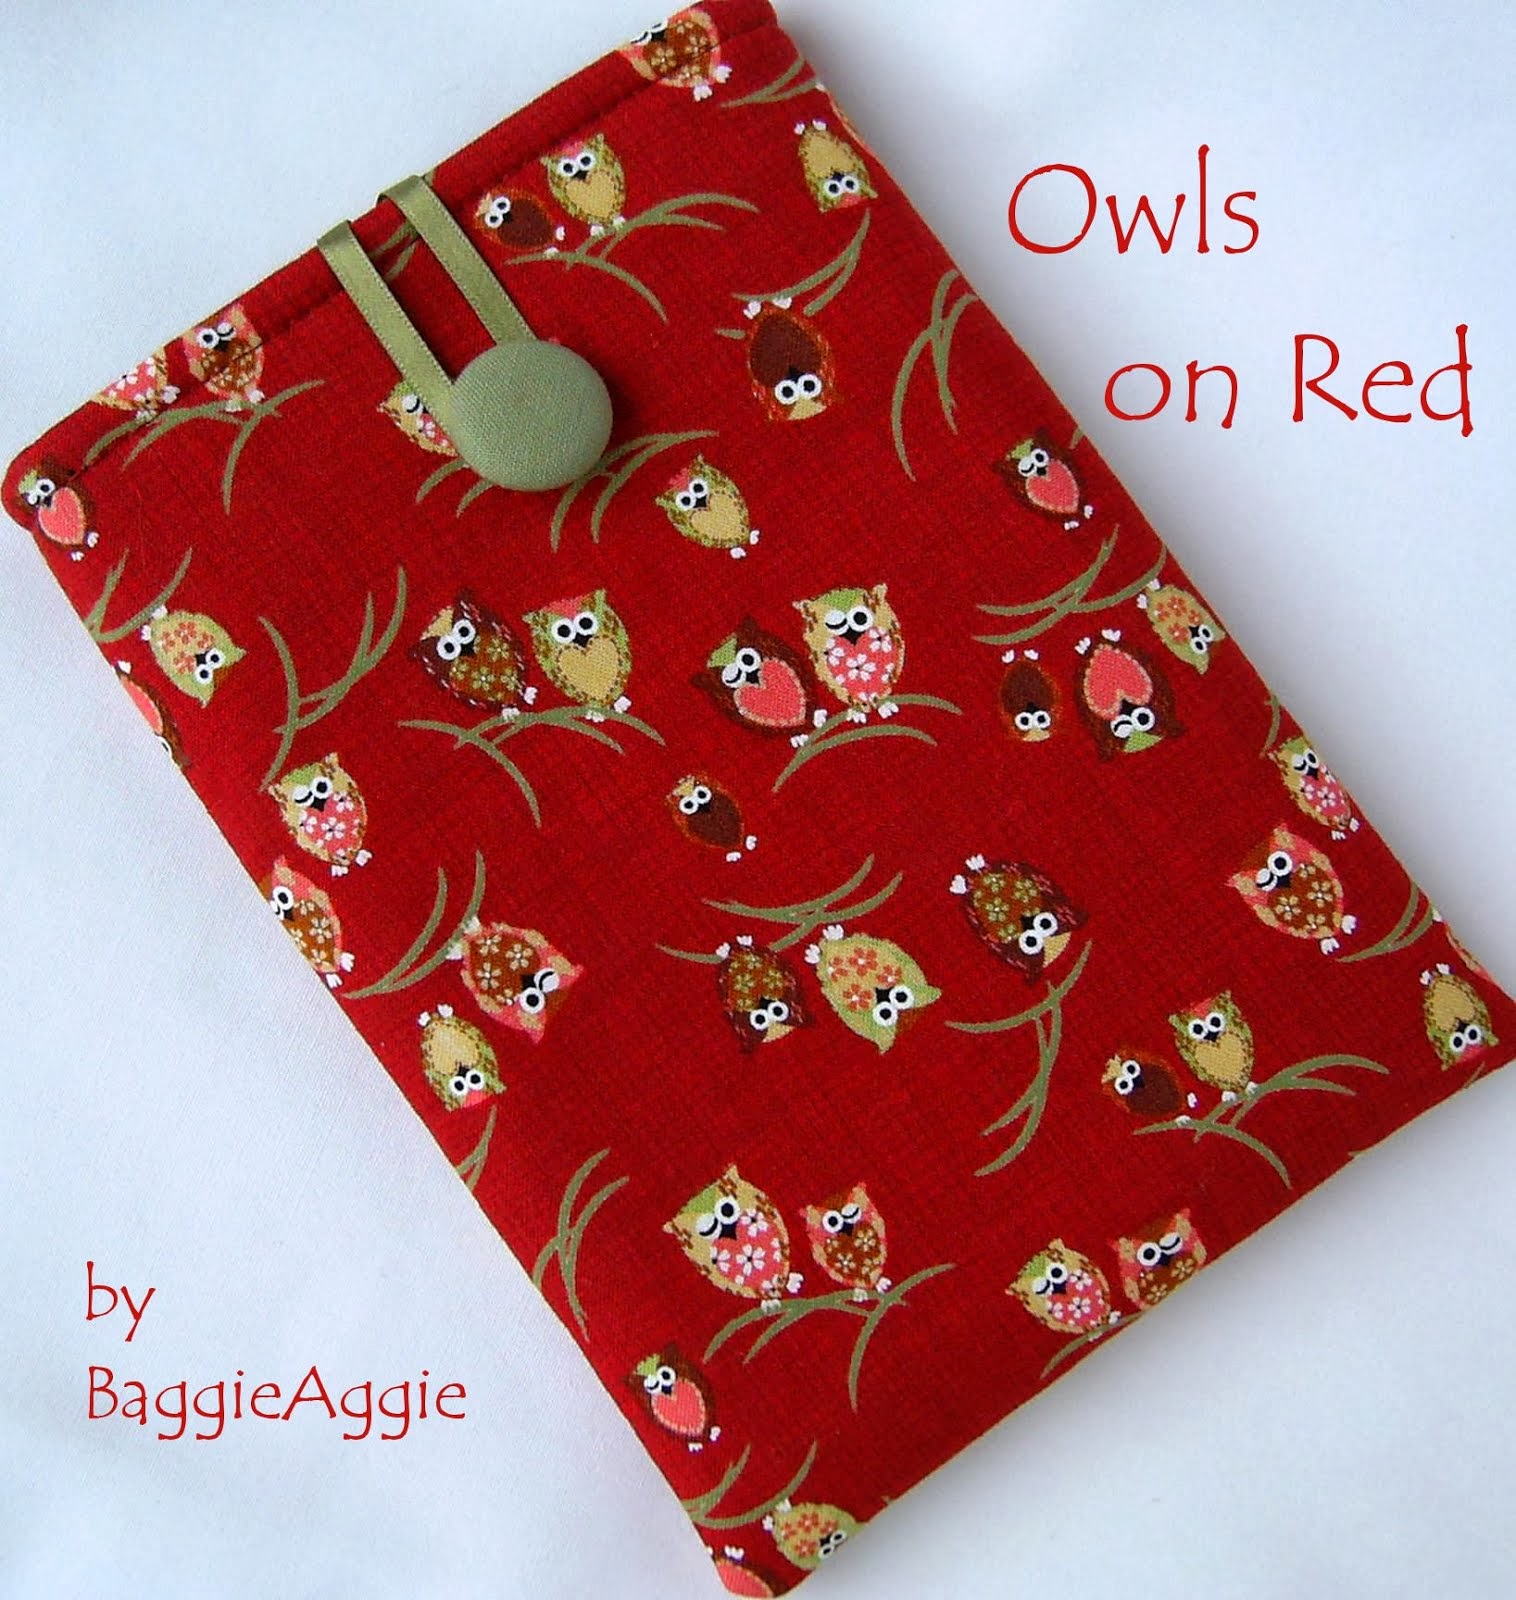 Owls on Red